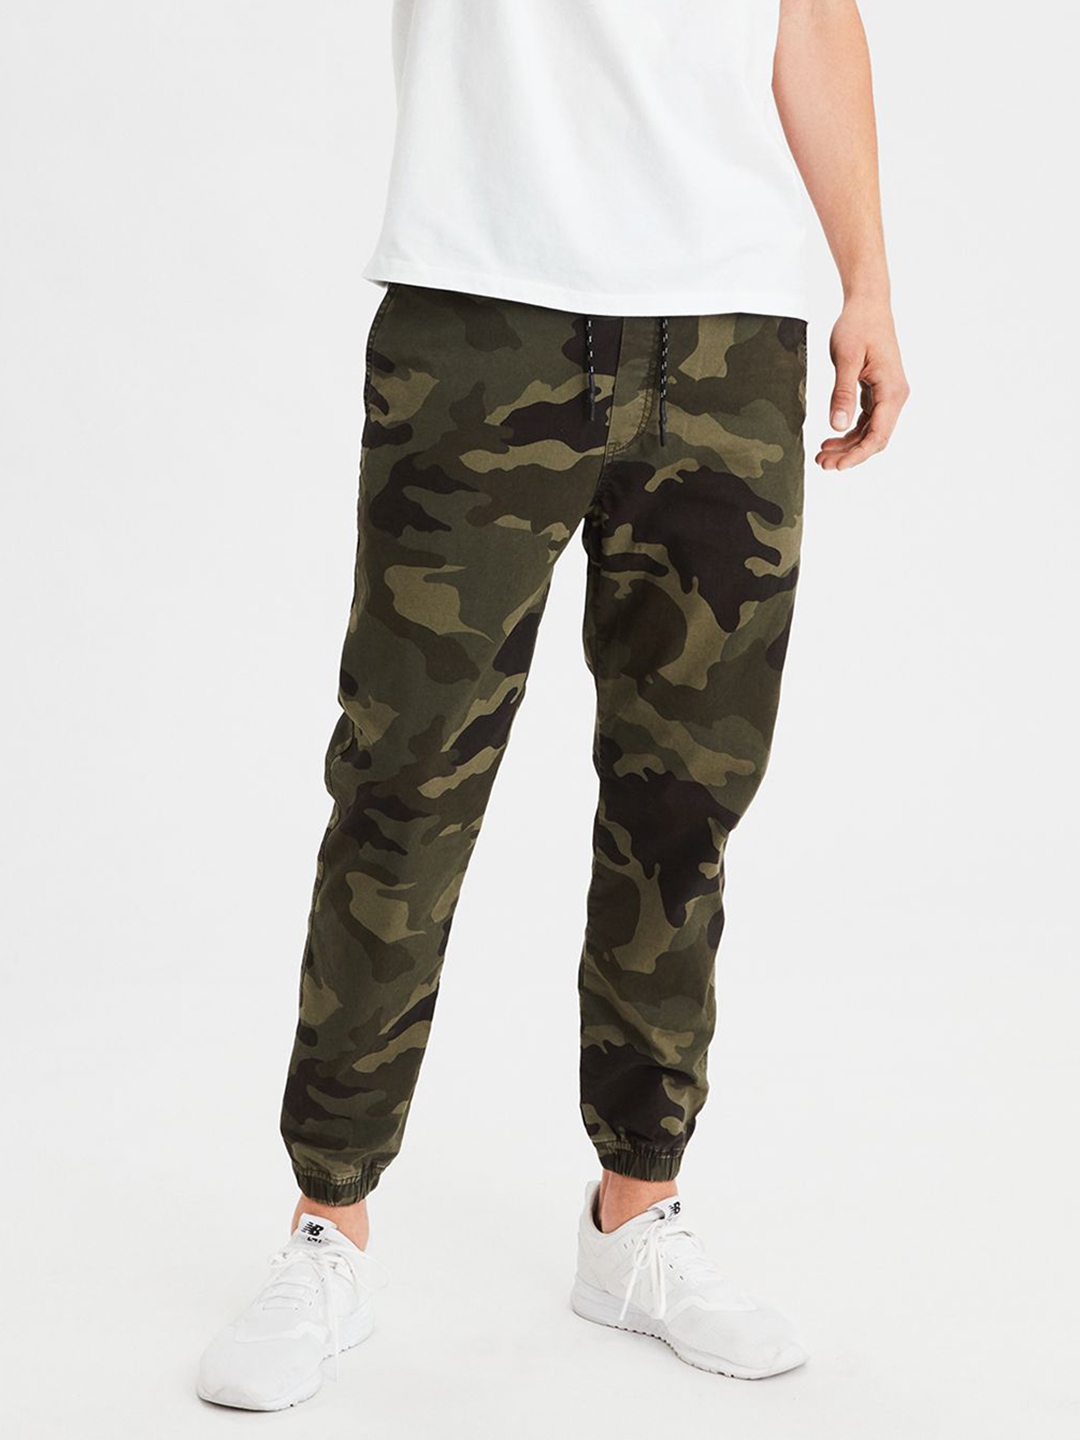 Buy Olive Green Trousers  Pants for Men by American Eagle Outfitters  Online  Ajiocom